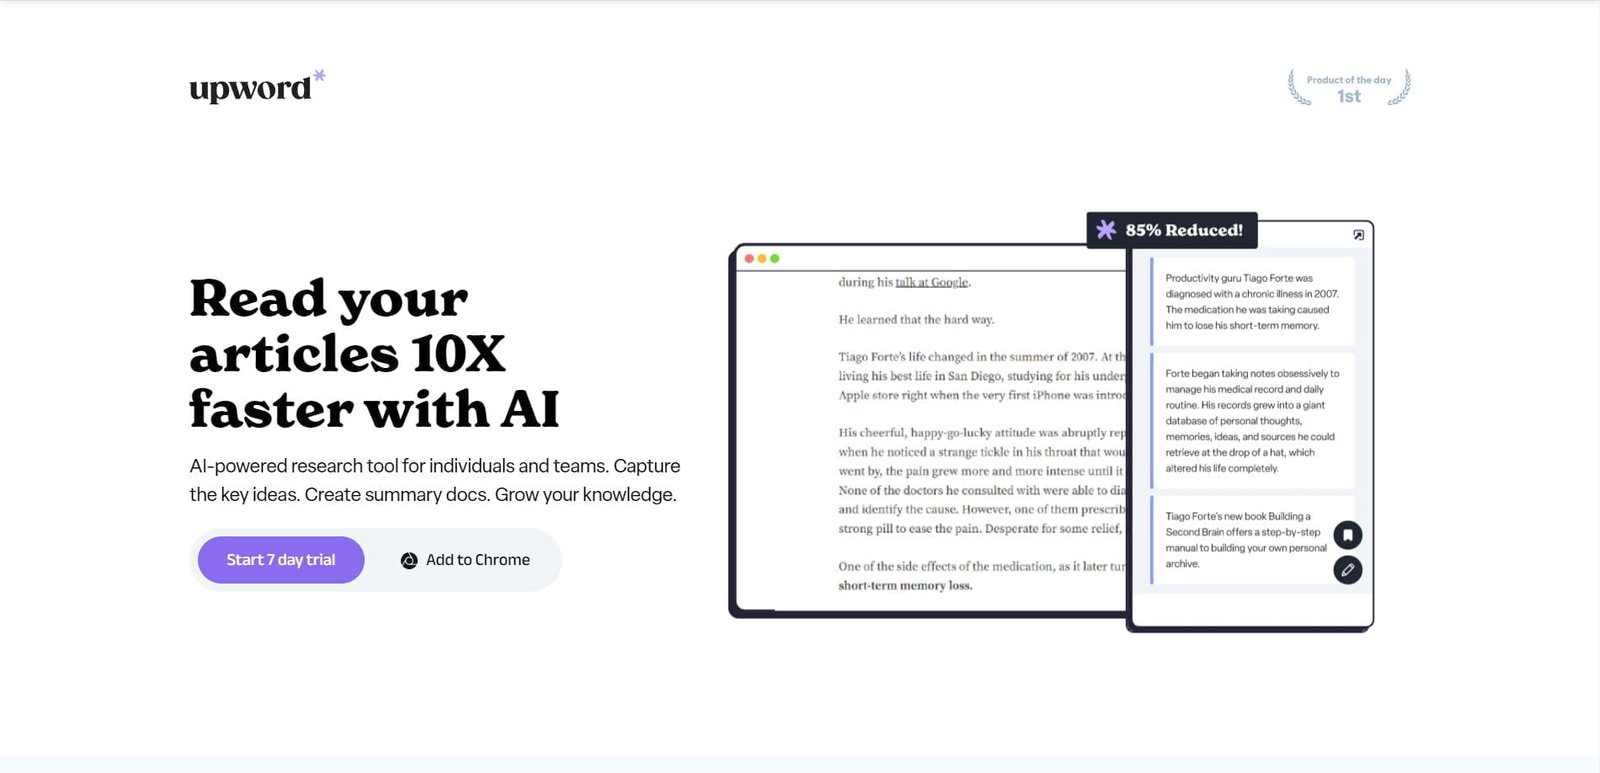 Upword AI summarizer and research tool designed to read articles